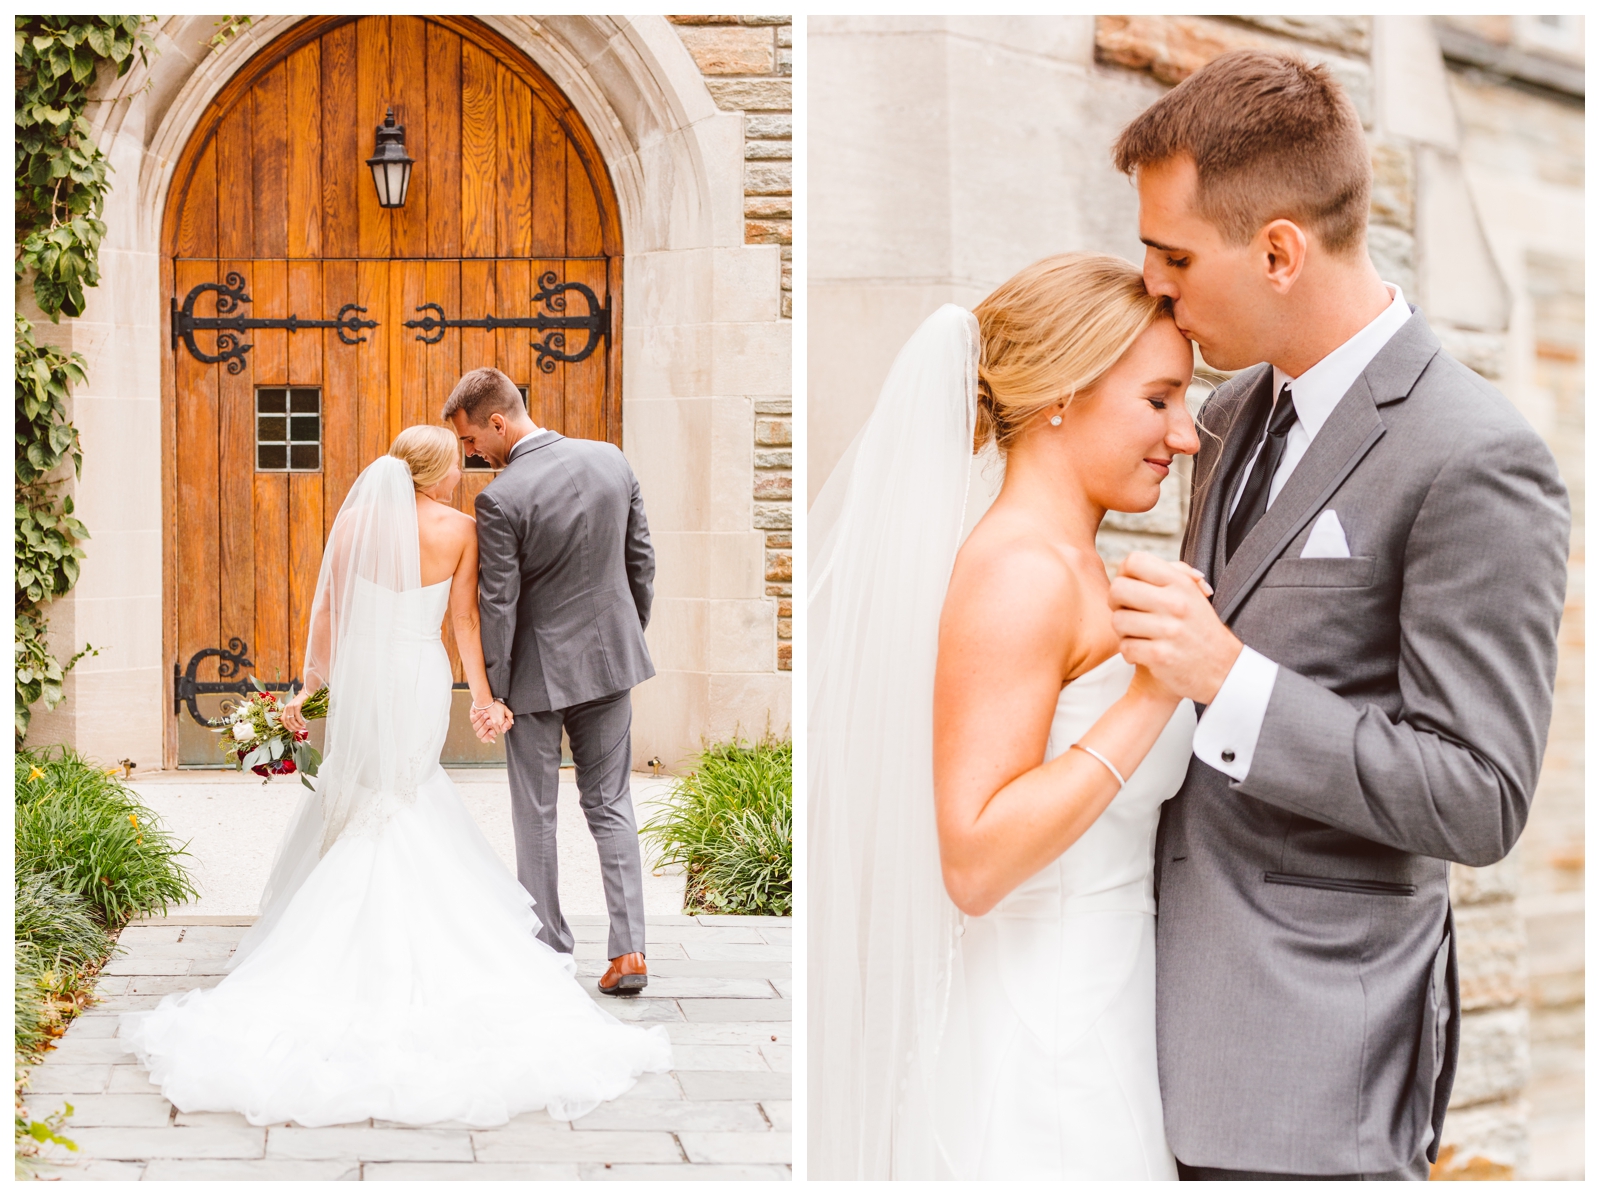 Loyola and AVAM Fall Wedding Inspiration - Baltimore Maryland Wedding by Brooke Michelle Photography